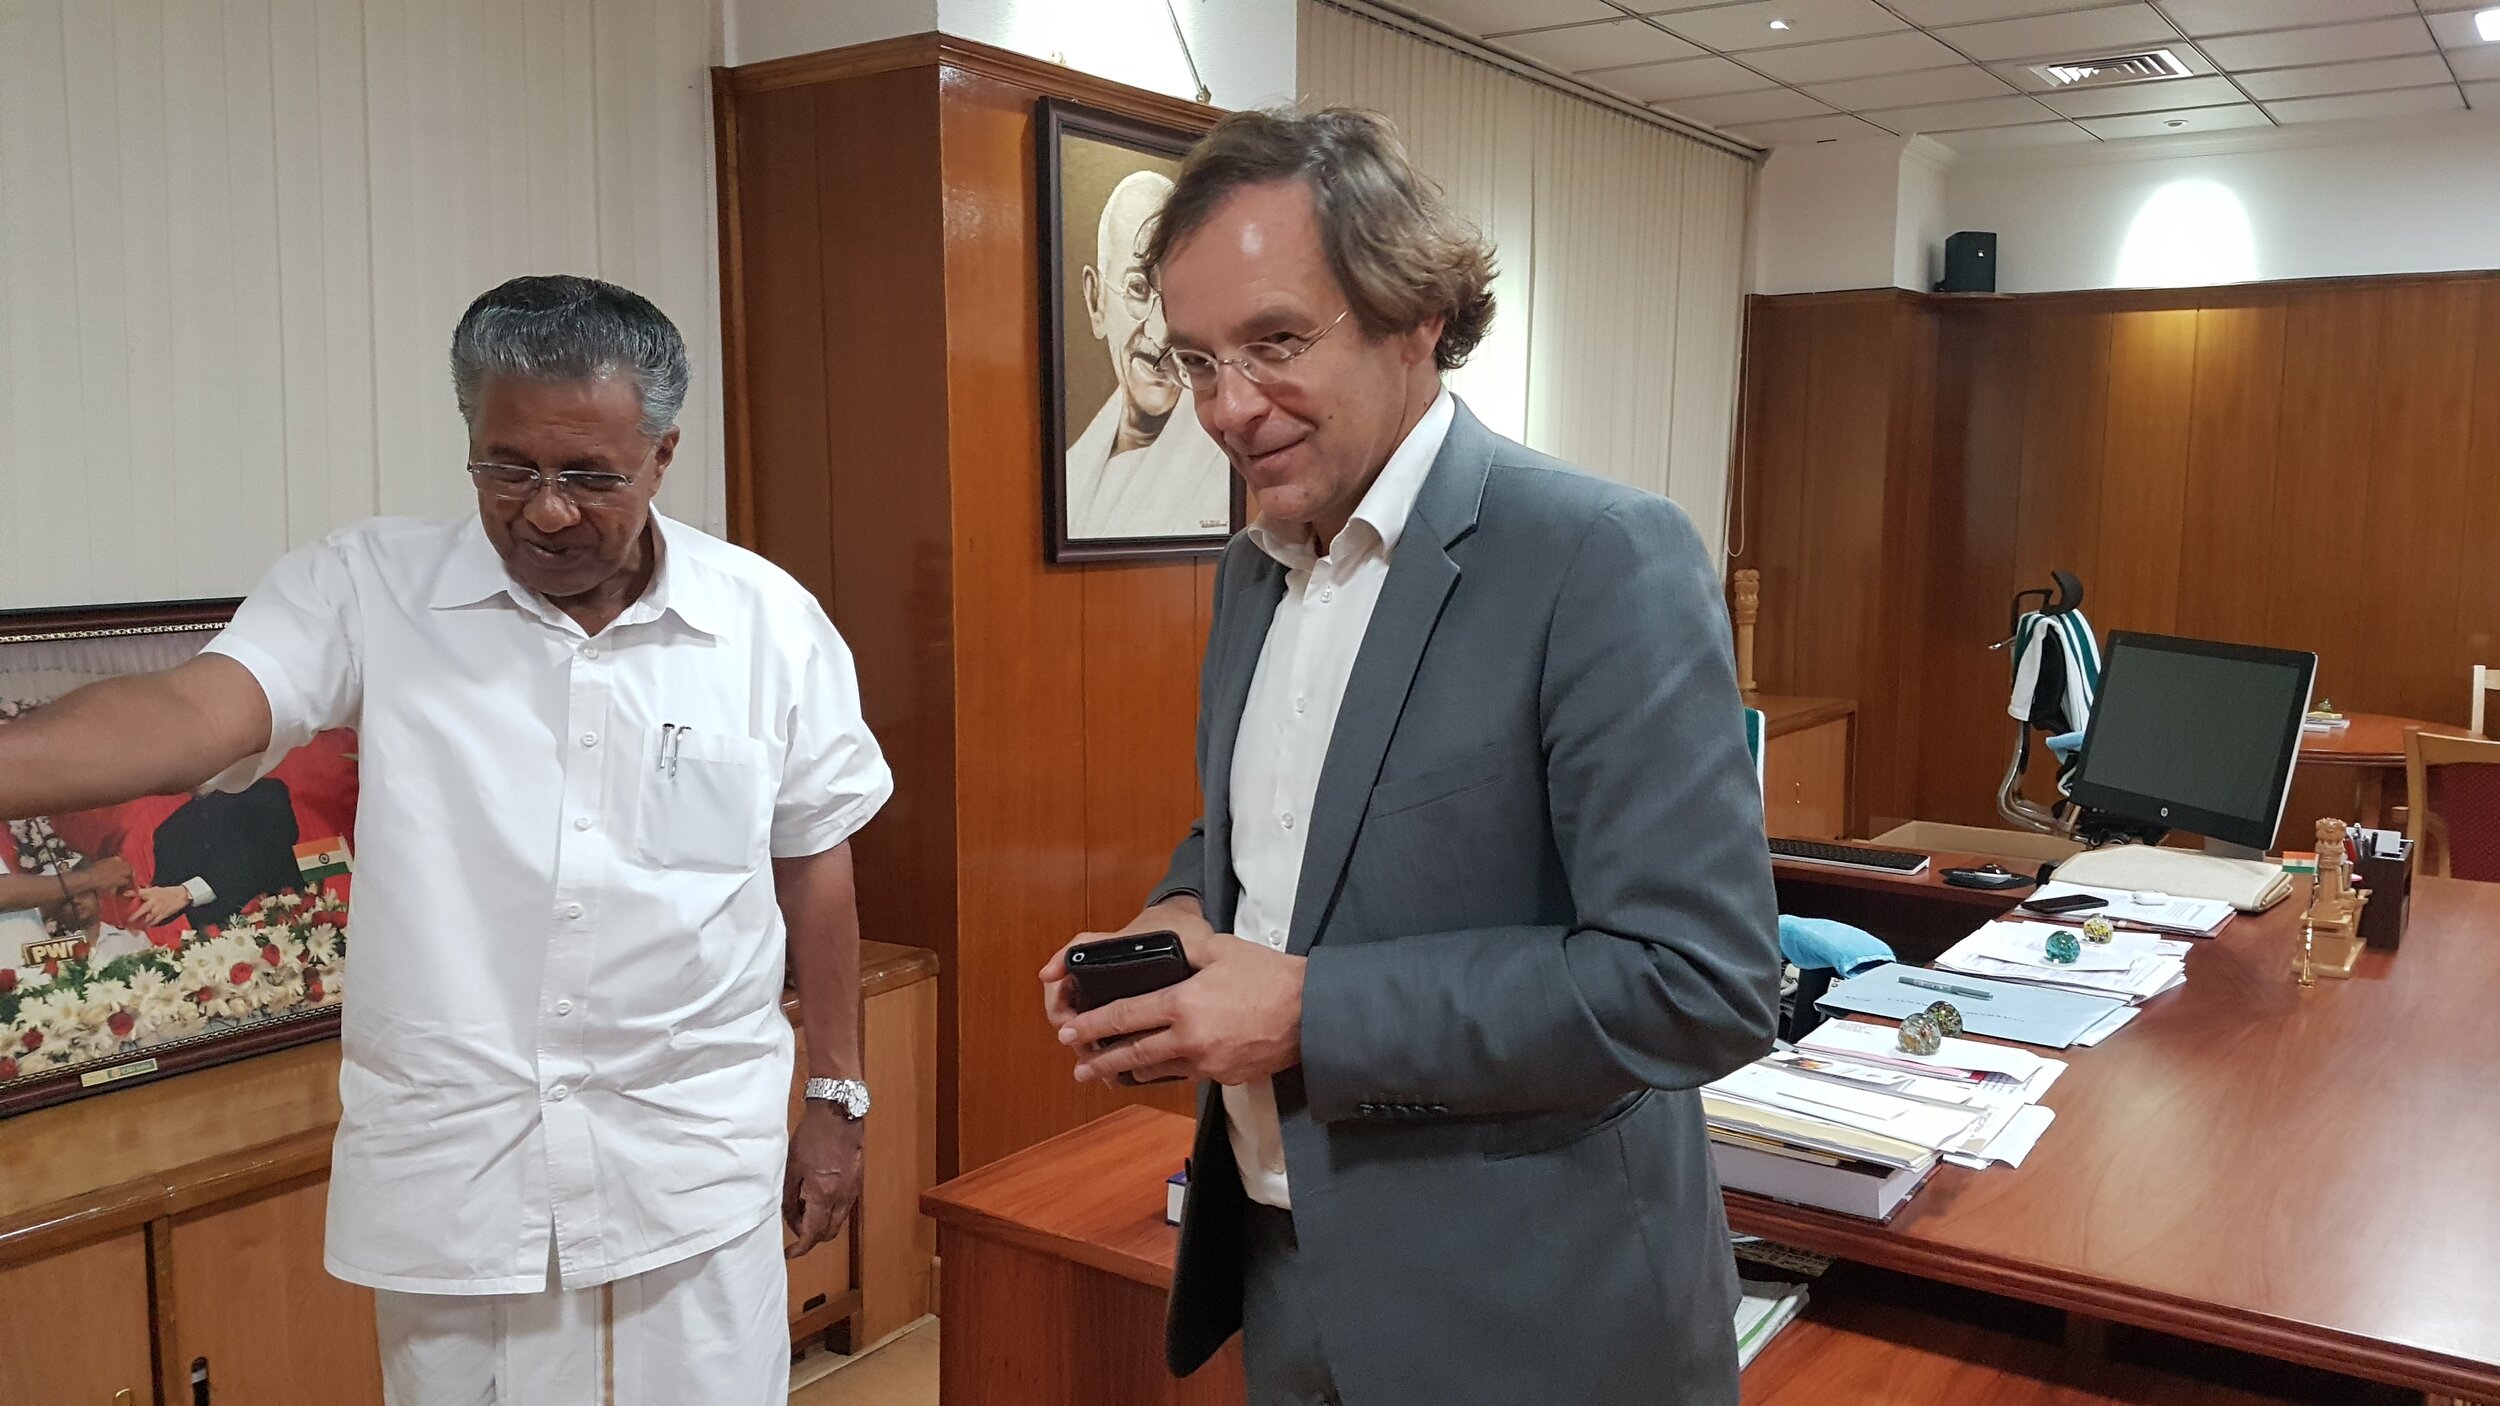 Director Jan Linssen and the Chief Minister of the Indian state of Kerala, Pinarayi Vijayan